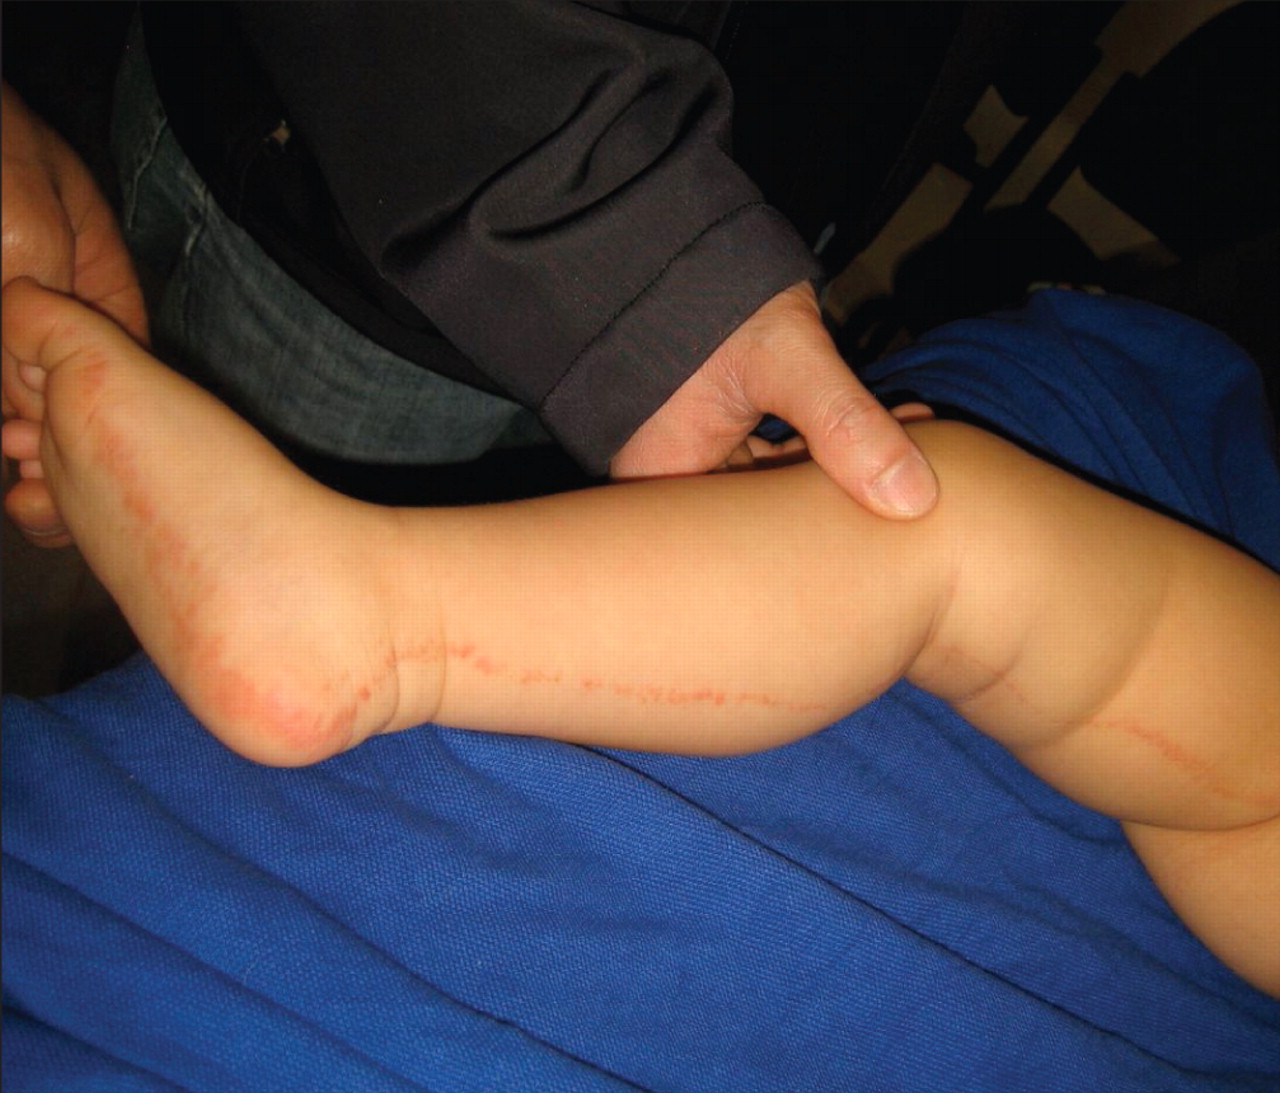 The toddler with 1 striped leg: a linear papular rash